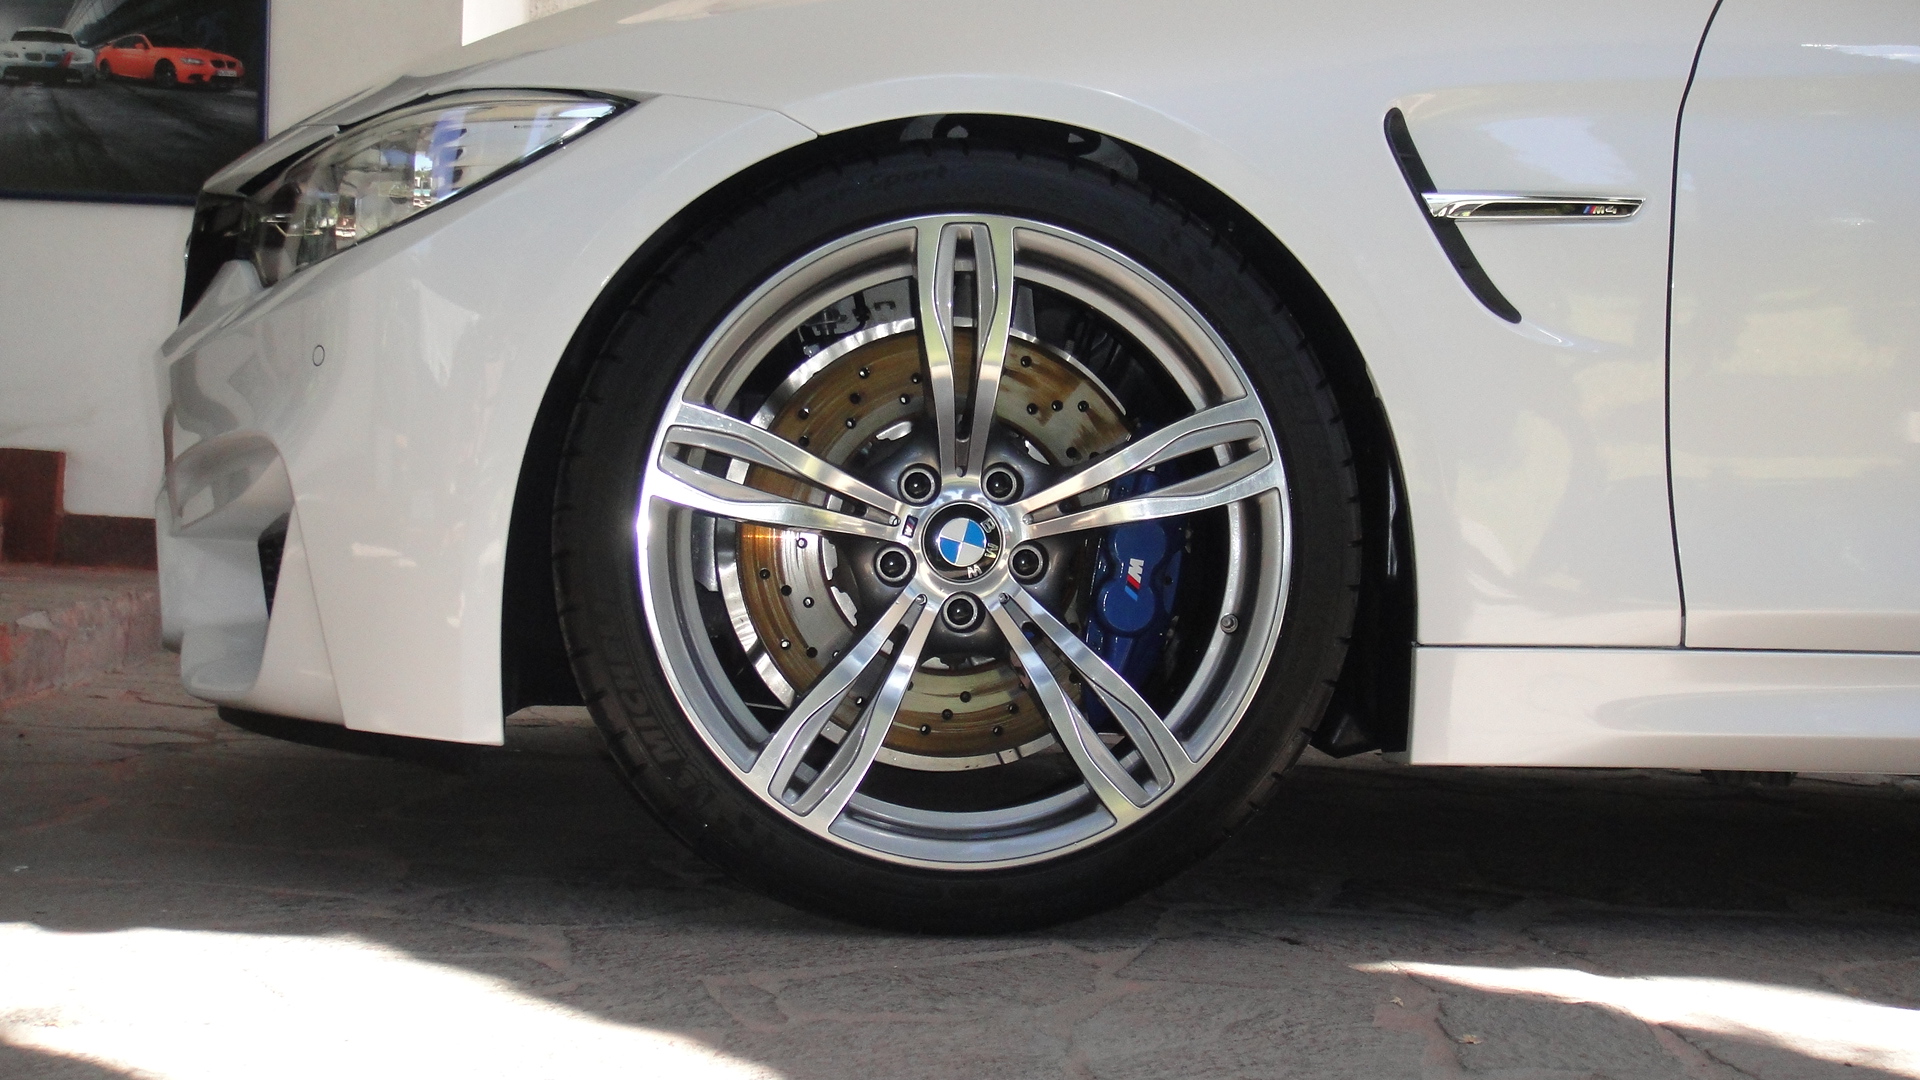 255-35-20 front 295-30-20 rear - BMW M3 and BMW M4 Forum